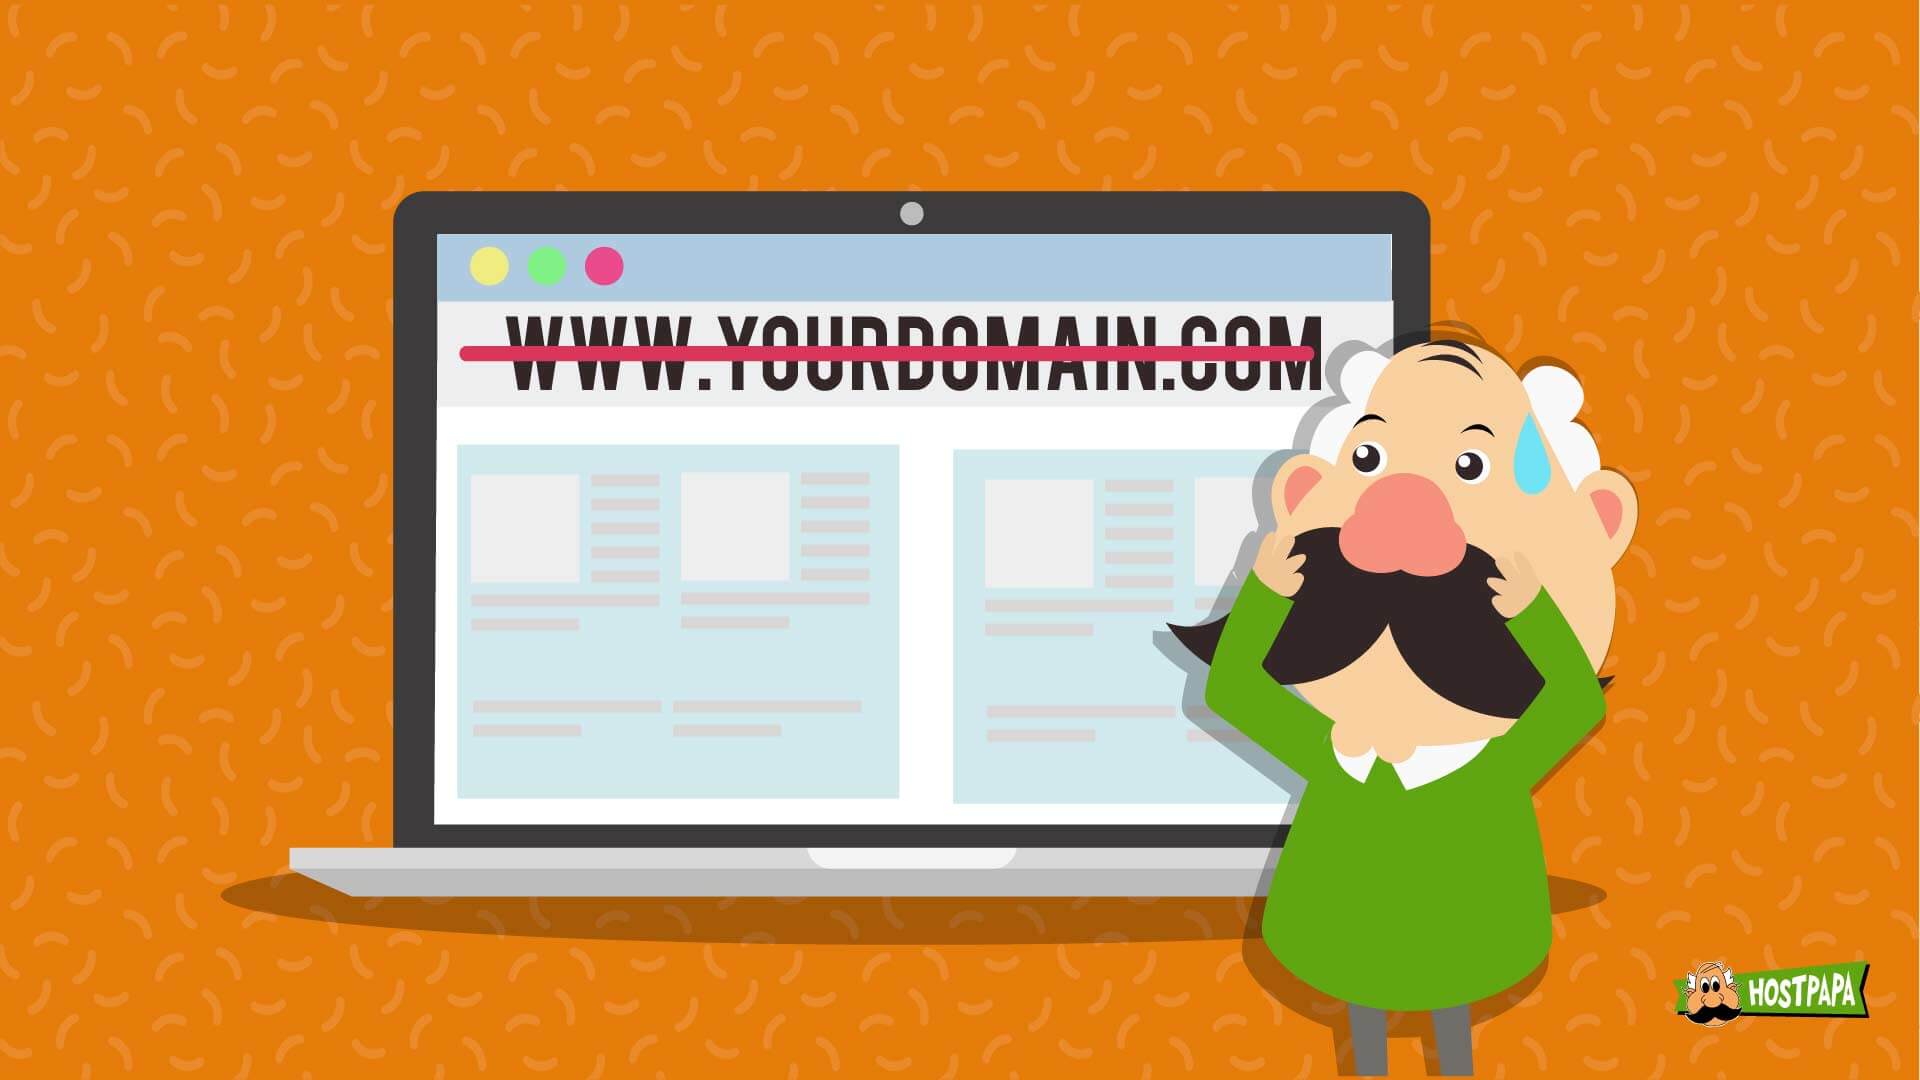 What to do if your domain name is taken